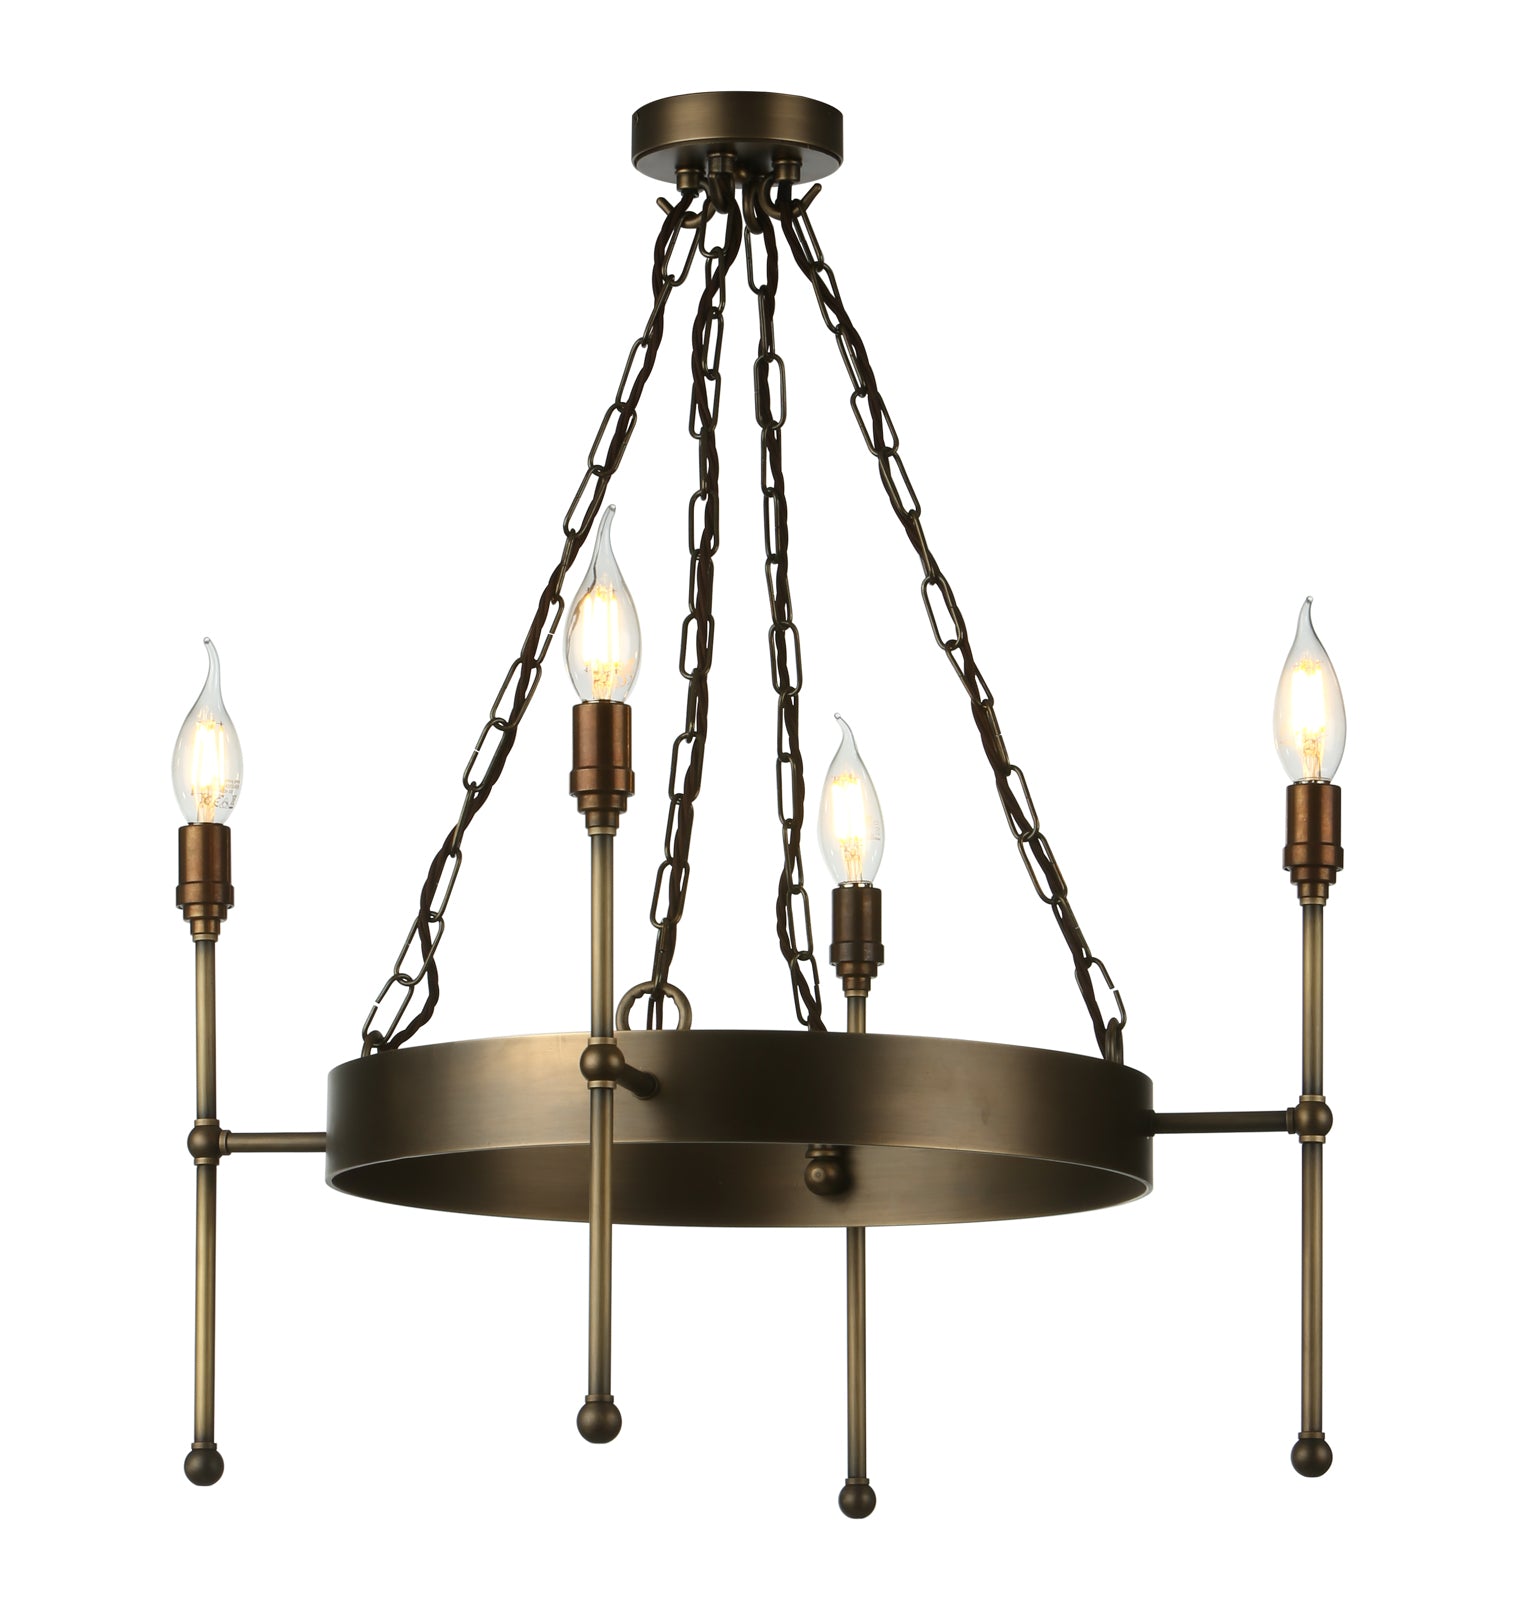 David Hunt Durrell 4 Light Multi-Arm Pendant In Antique Brass Fitting Only